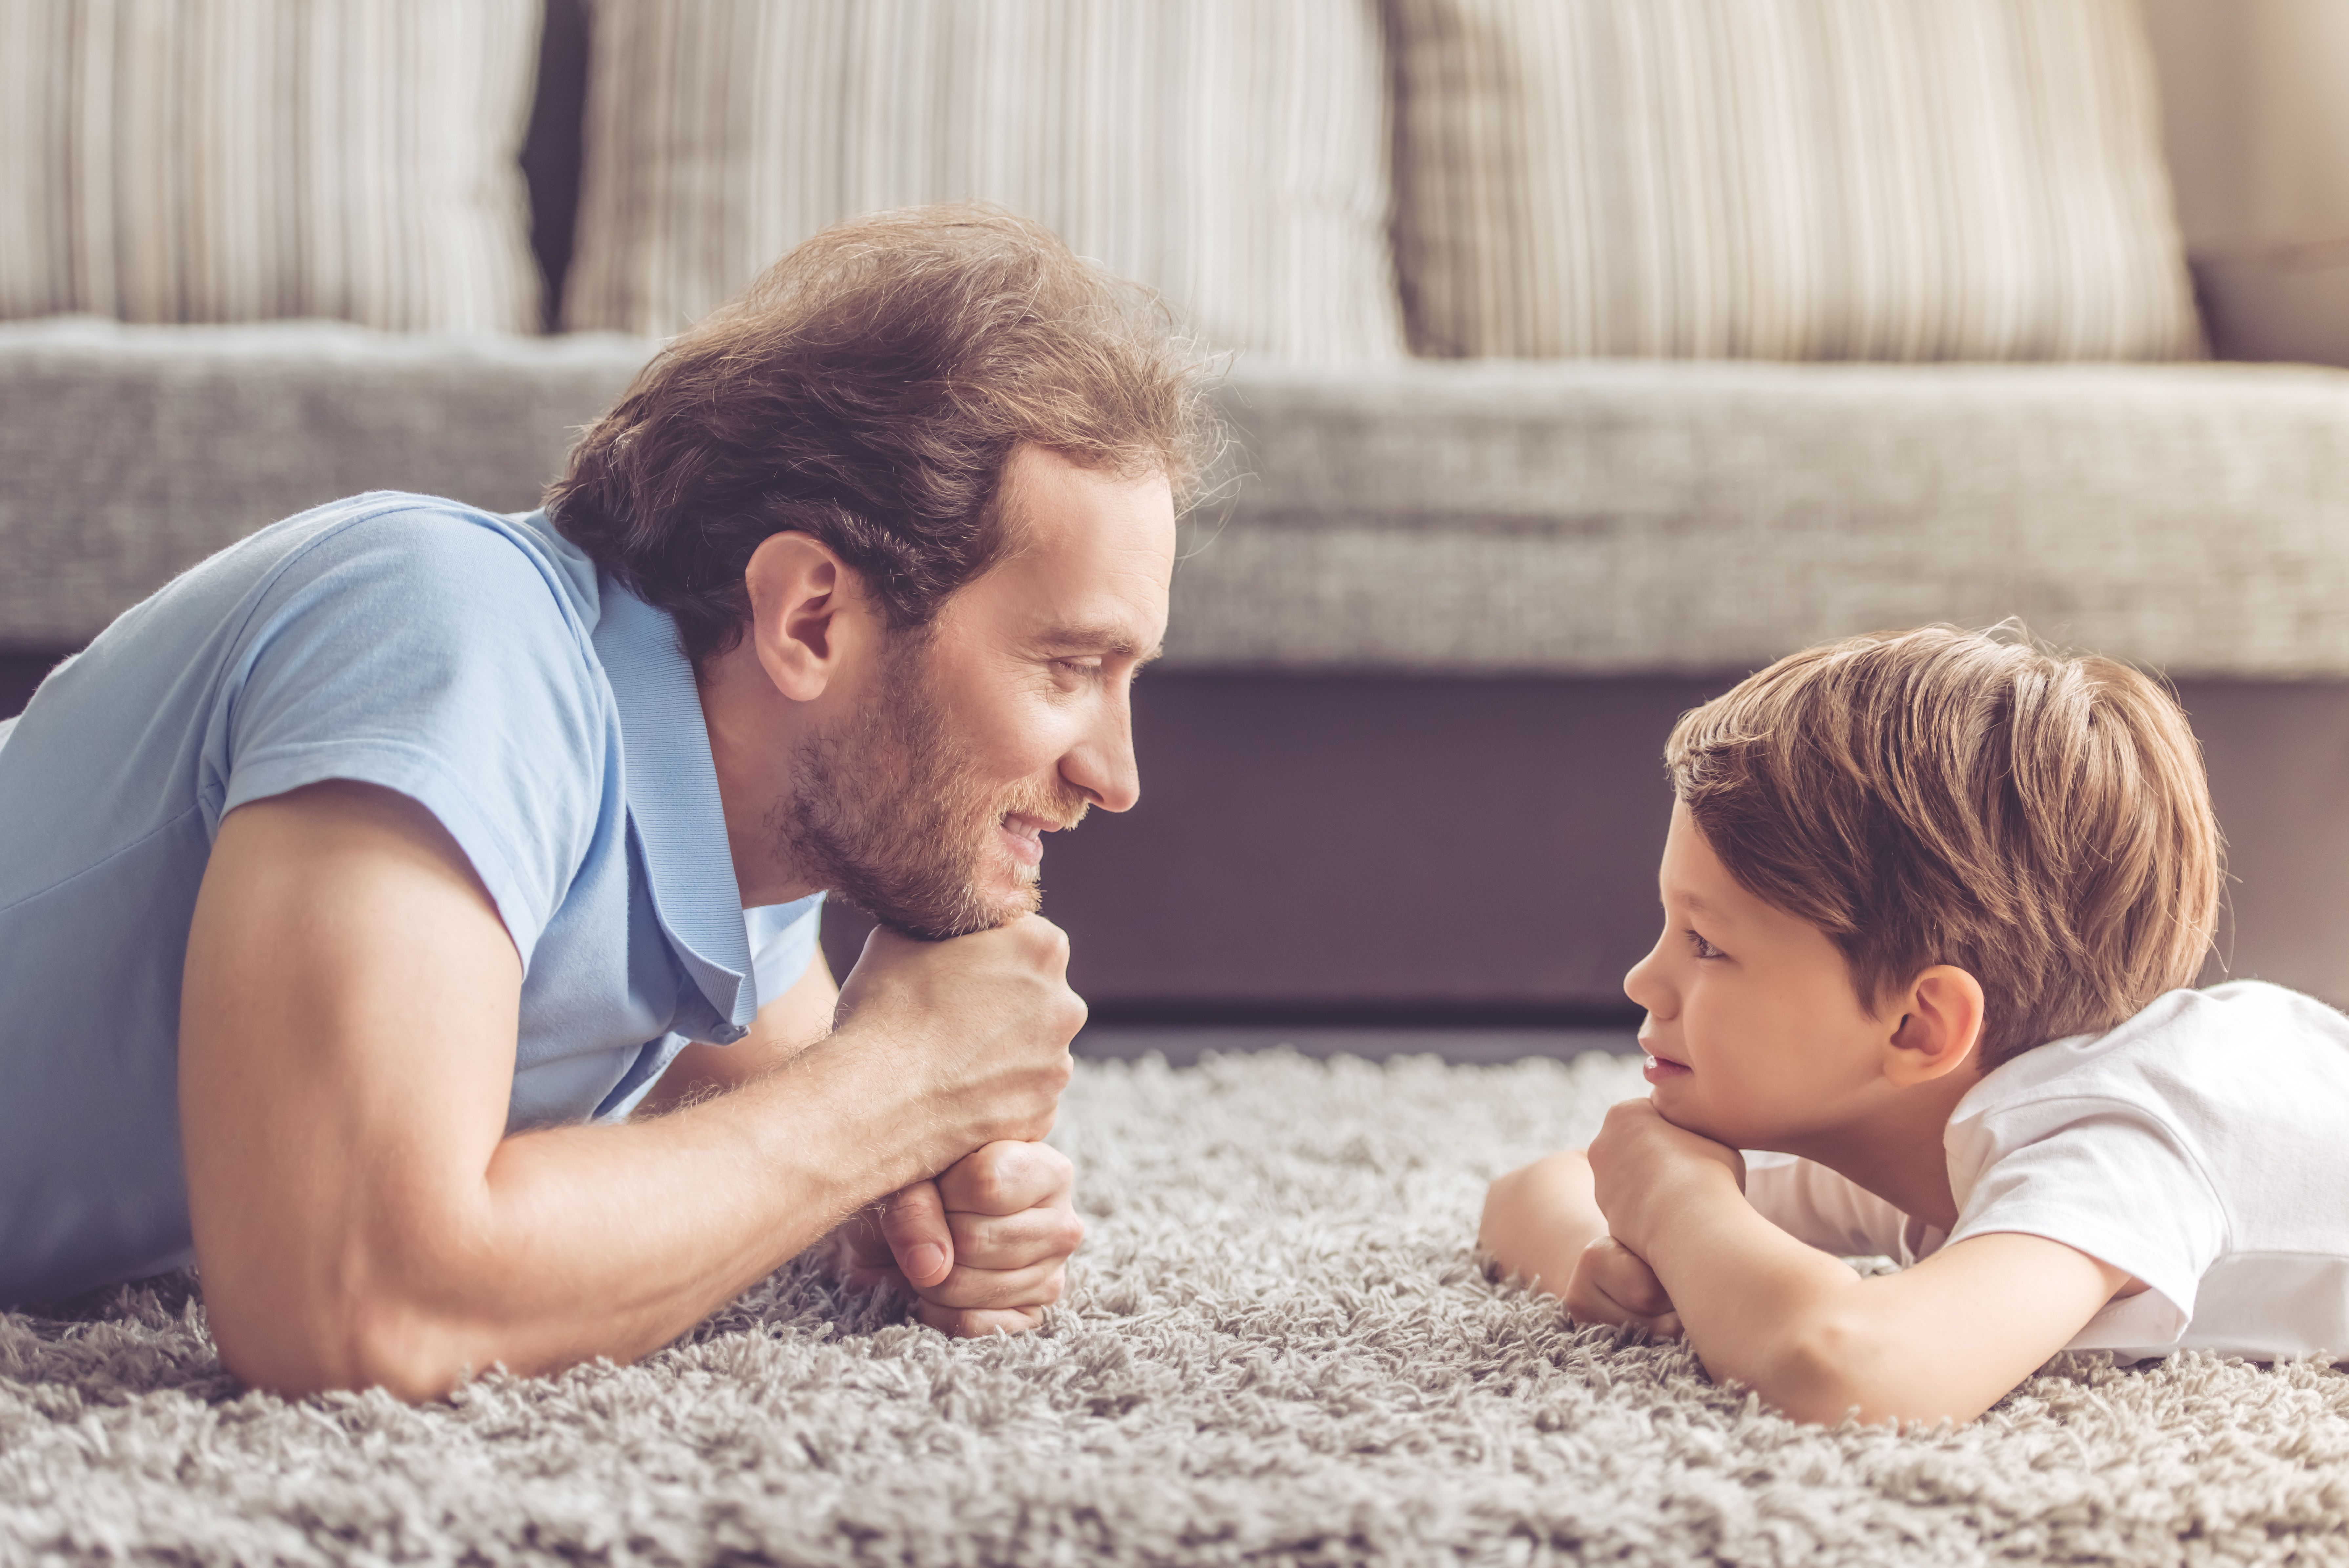 A doting dad and his son playing on the floor. | Source: Shutterstock